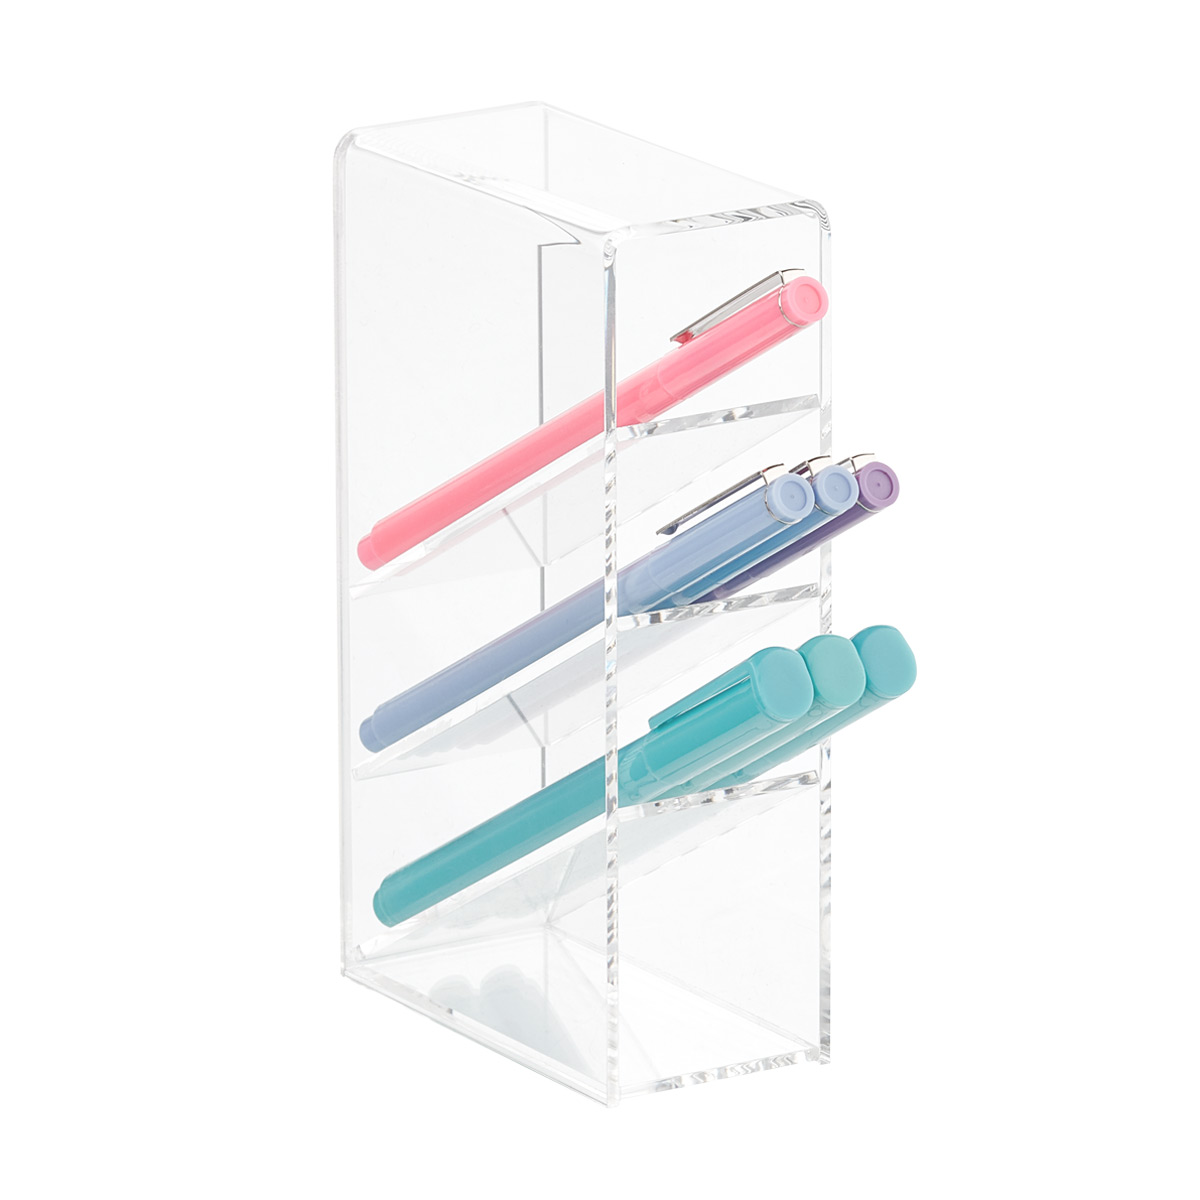 https://www.containerstore.com/catalogimages/340463/10073915-slanted-pen-organizer-acryl.jpg